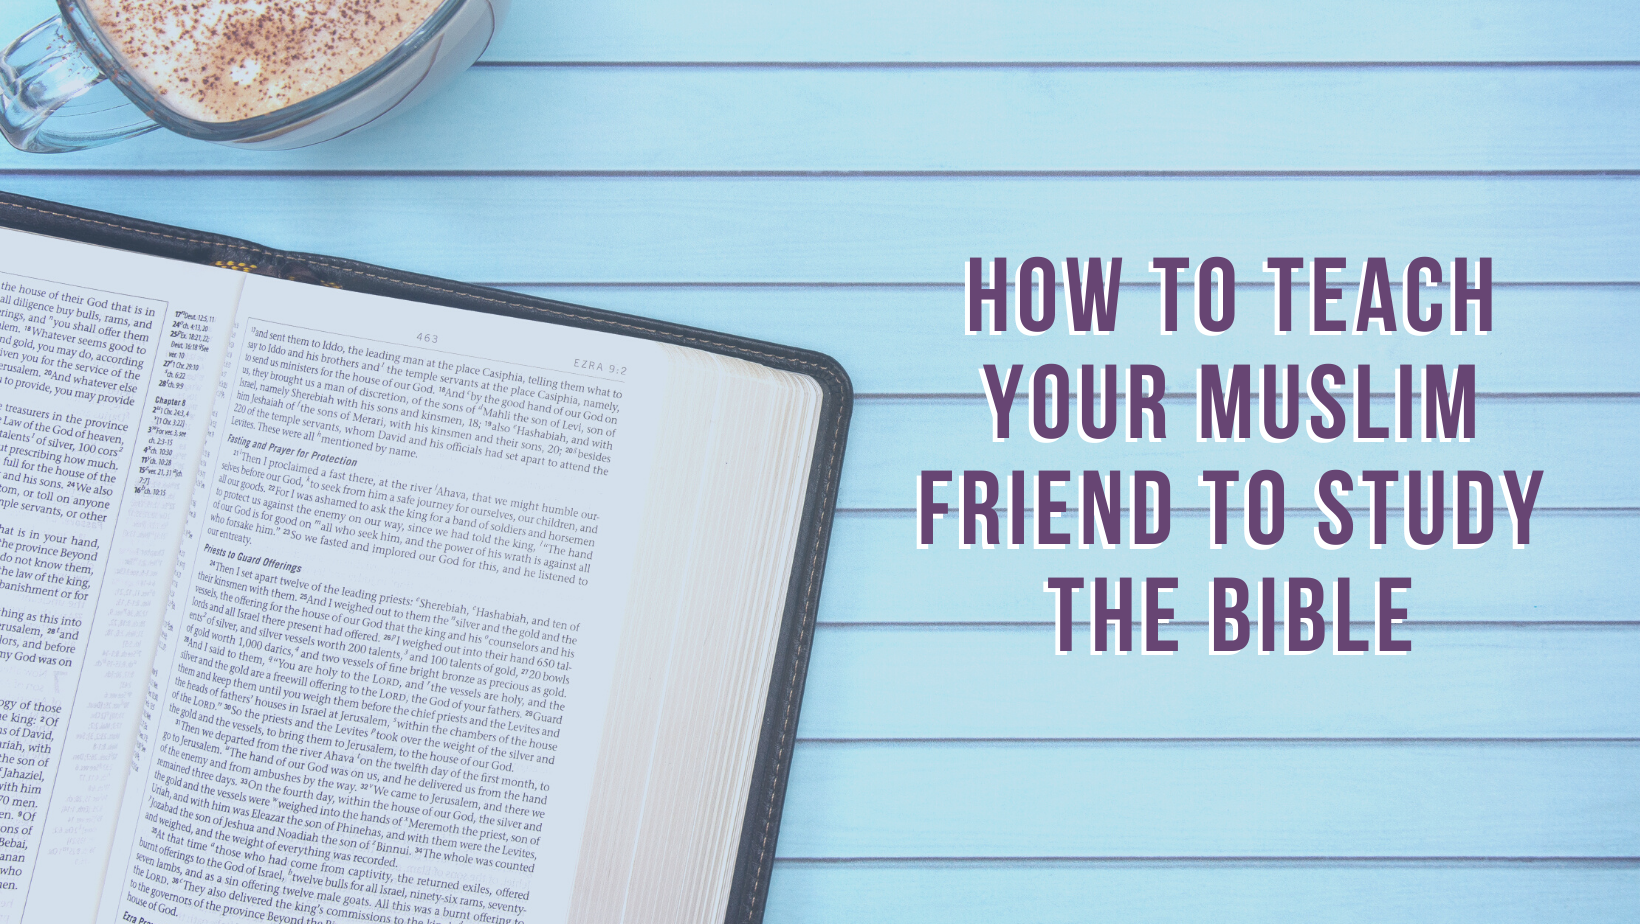 How to teach your Muslim friend to study the Bible